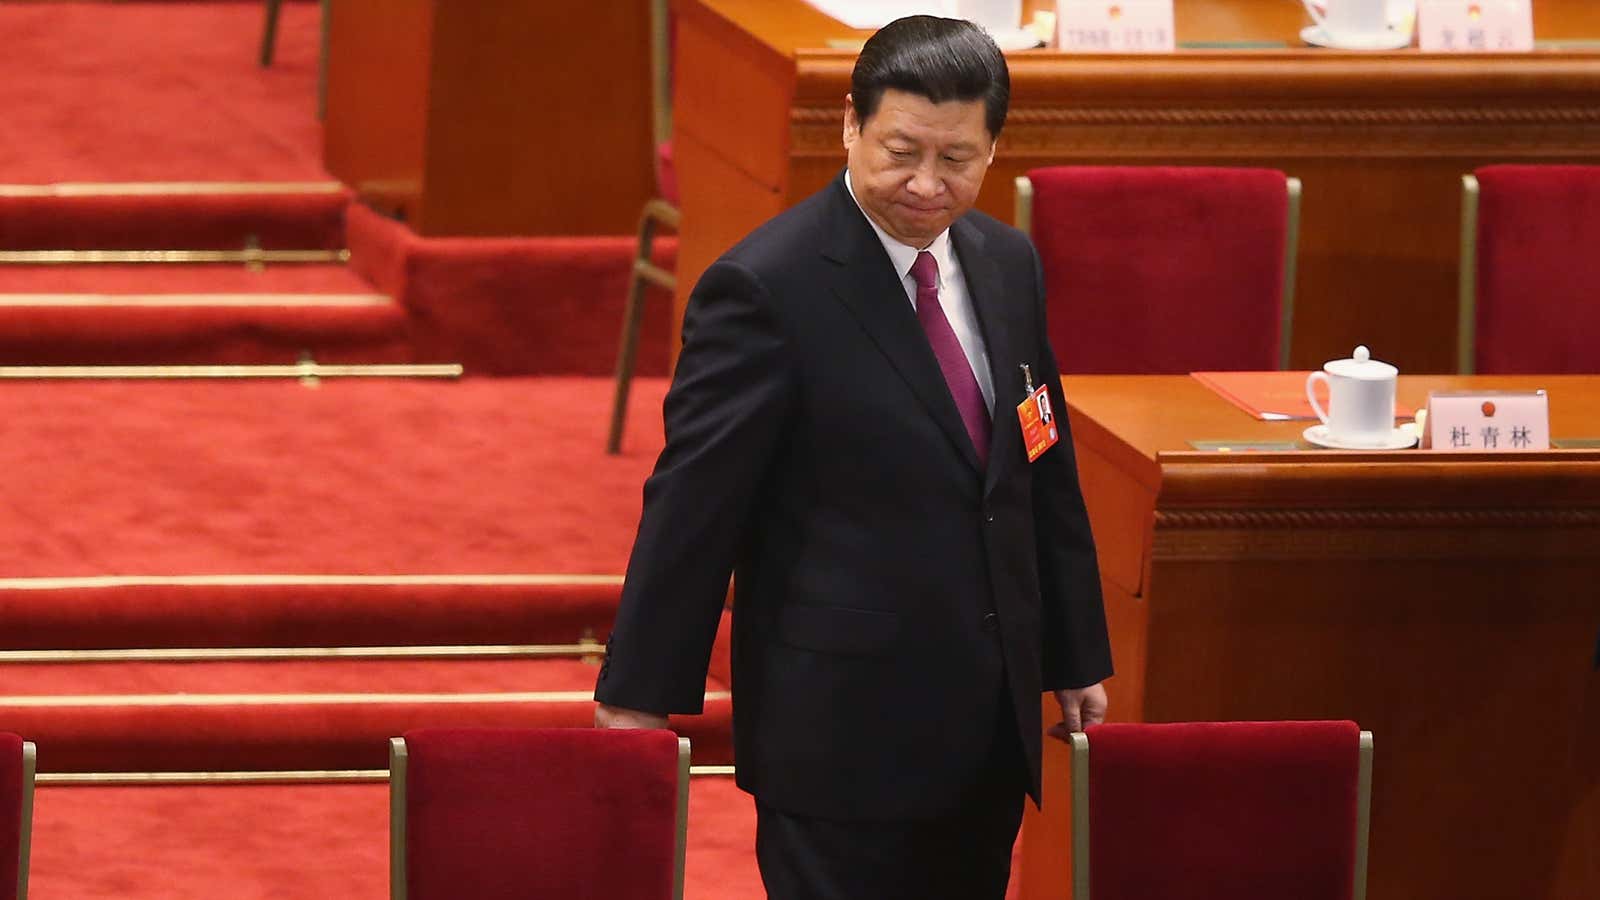 Xi Jinping is in charge of China’s future, but that doesn’t mean he can’t learn from the past.